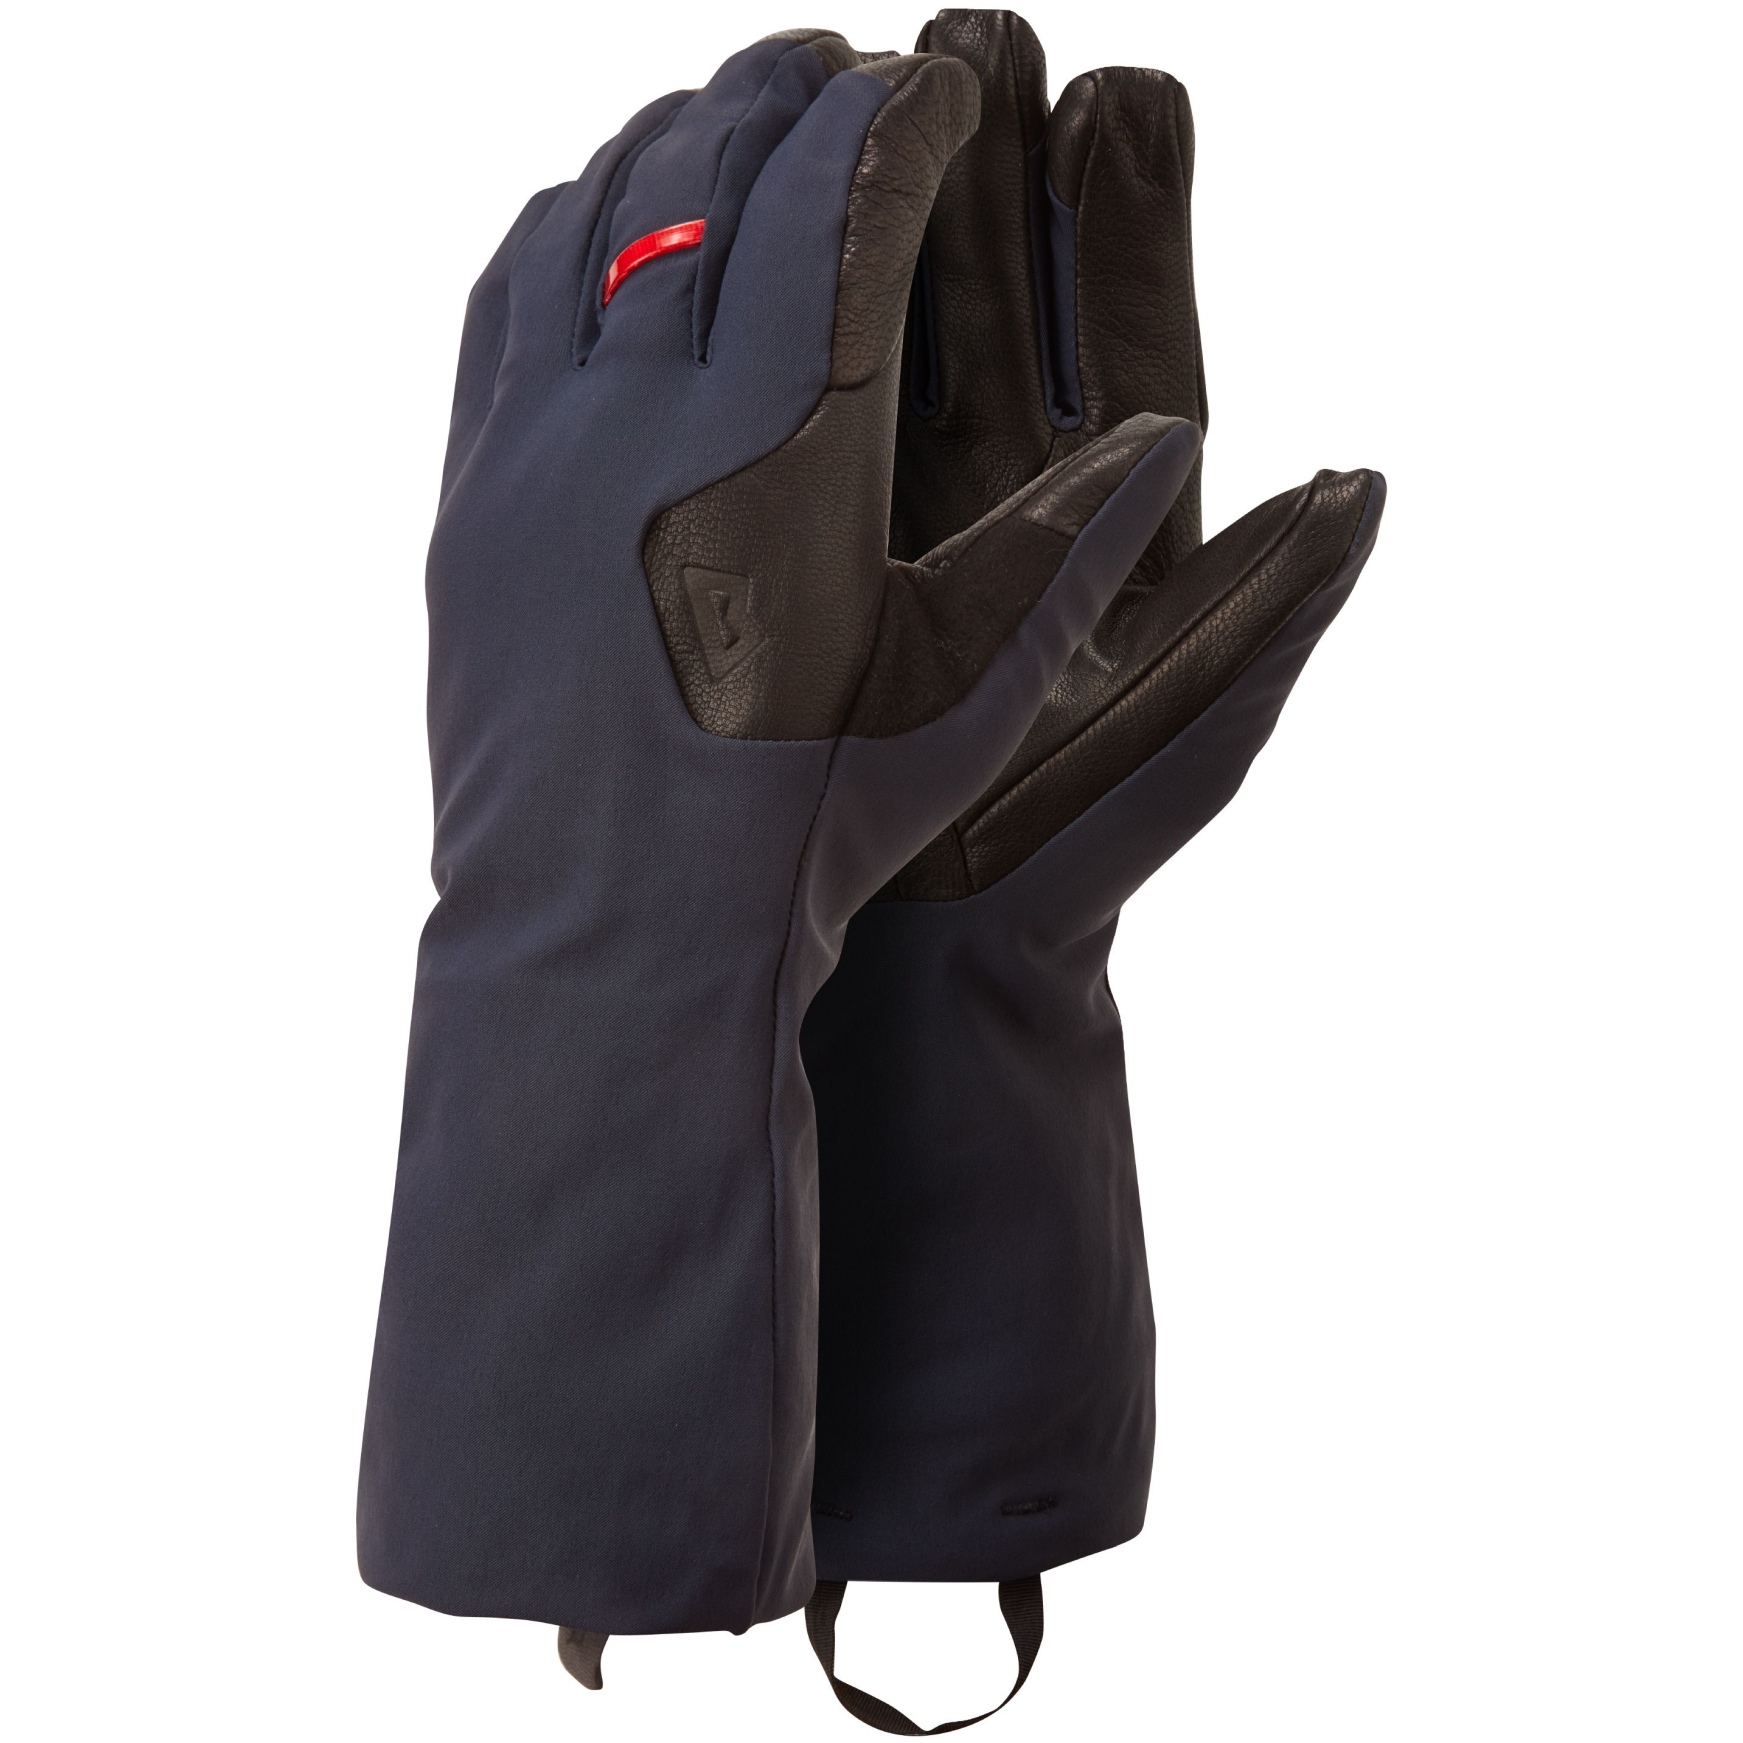 Picture of Mountain Equipment Randonee Gauntlet Gloves ME-005668 - cosmos/black